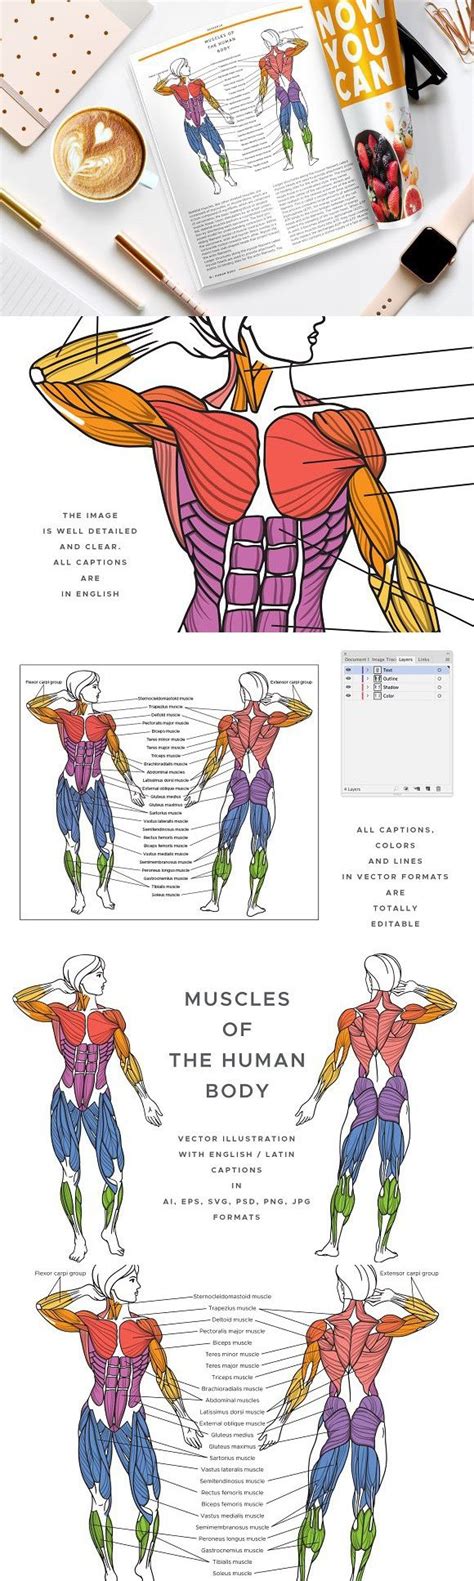 The primary job of muscle is to move the bones of the skeleton, but muscles also enable the heart to beat and constitute the walls of other important hollow organs. Muscles Of The Human Body | Human muscular system, Human body, Human